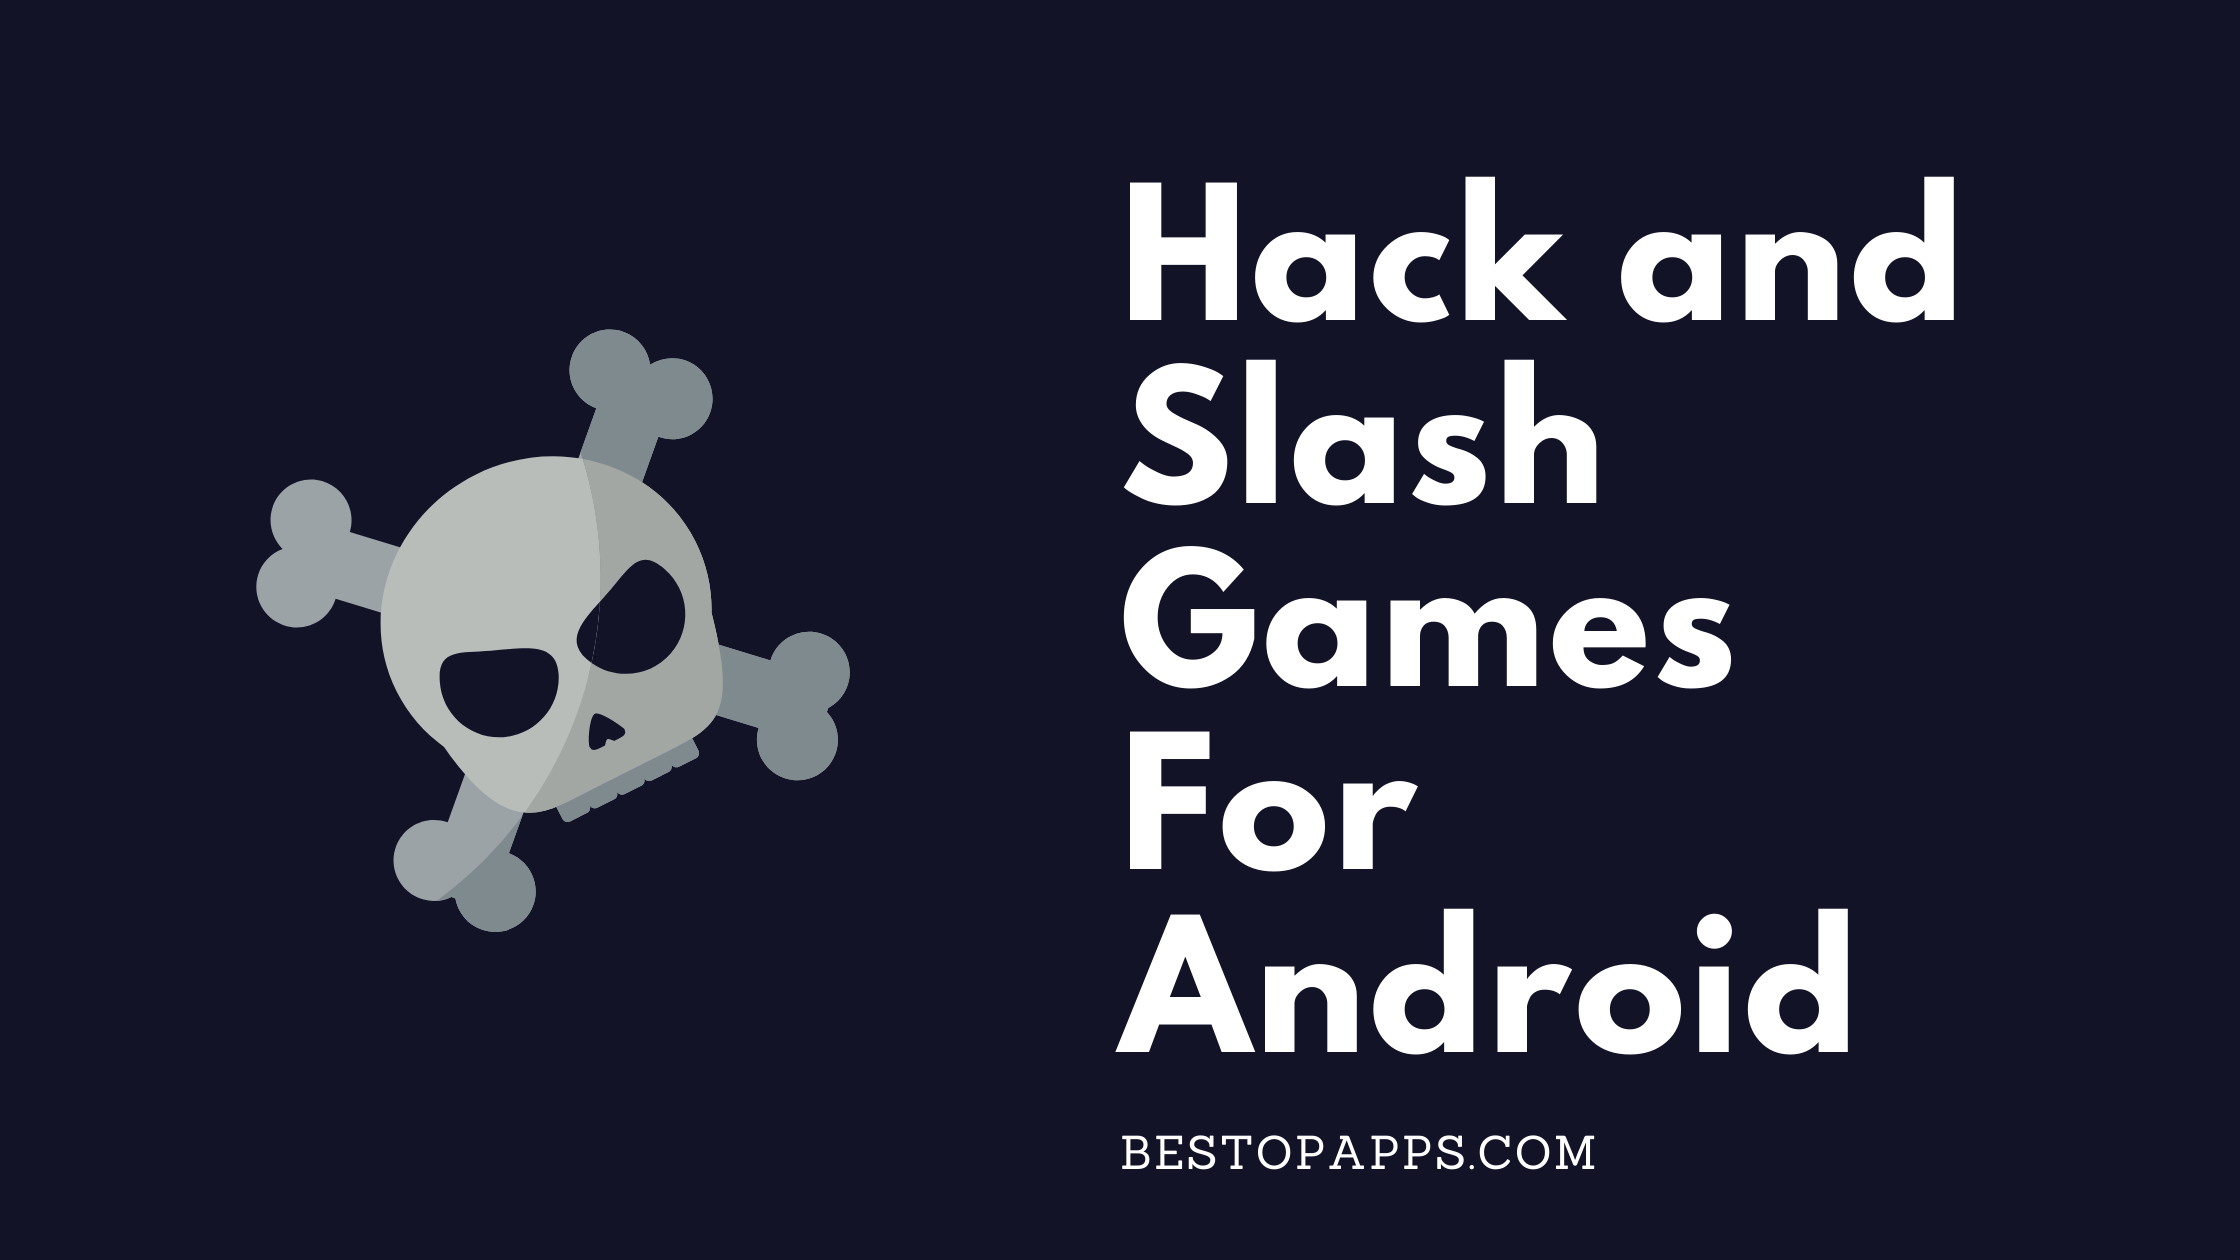 Hack and Slash Games For Android